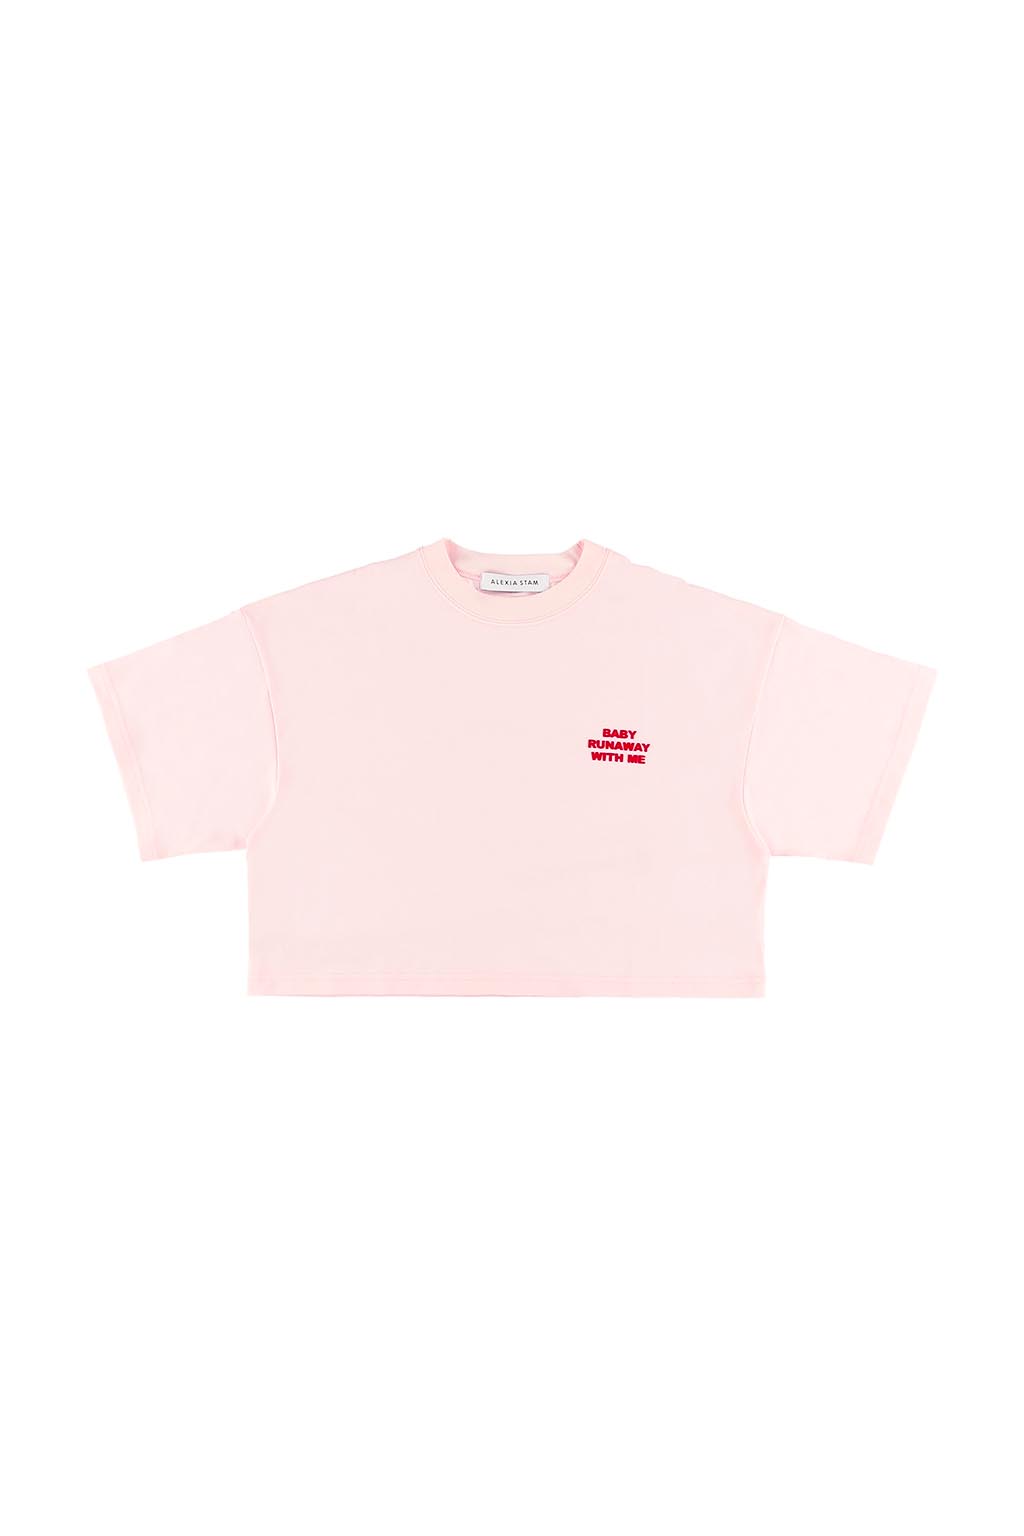 Front Message Tee Pink 7